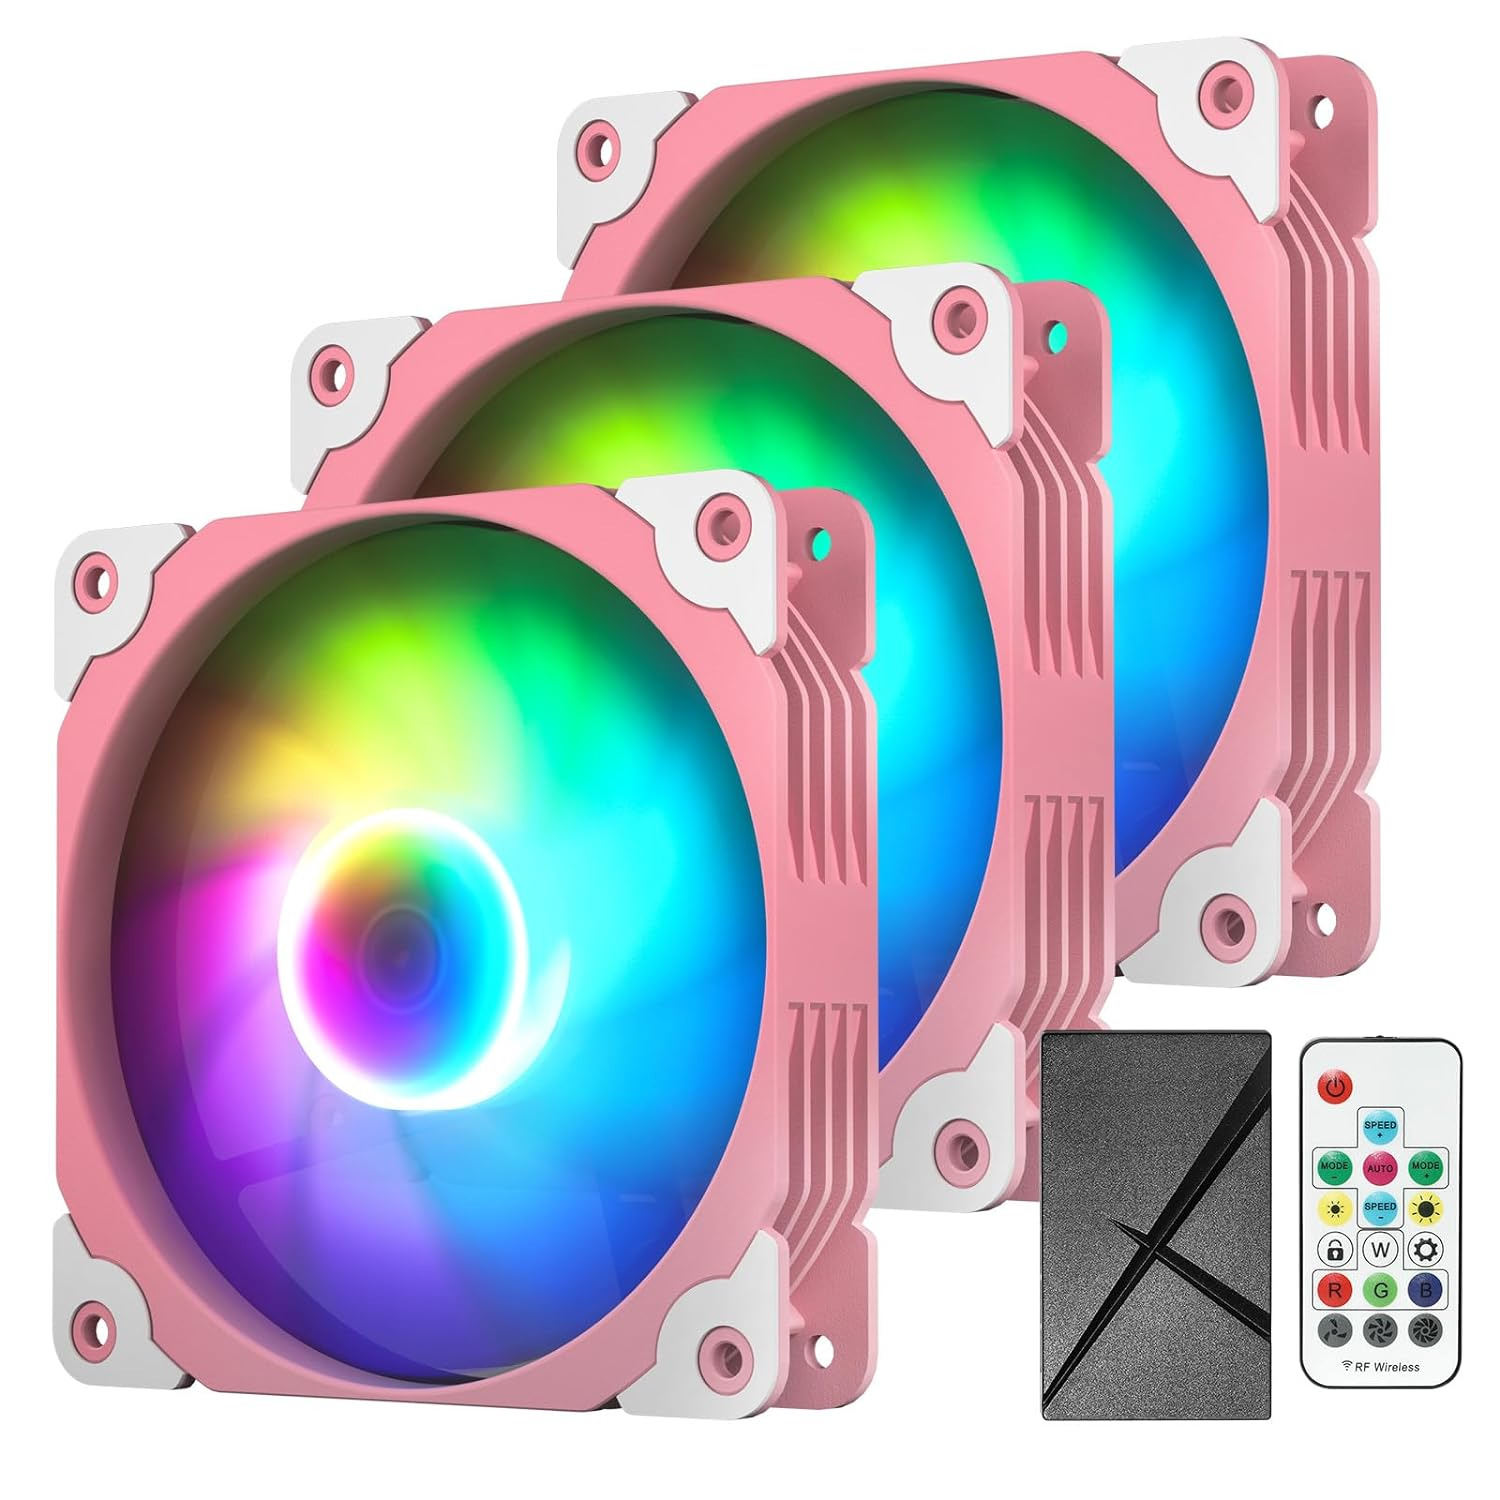 Vetroo 3-Pack Computer Case Fans 120Mm Address RGB & PWM Cooling Fans High Perfo